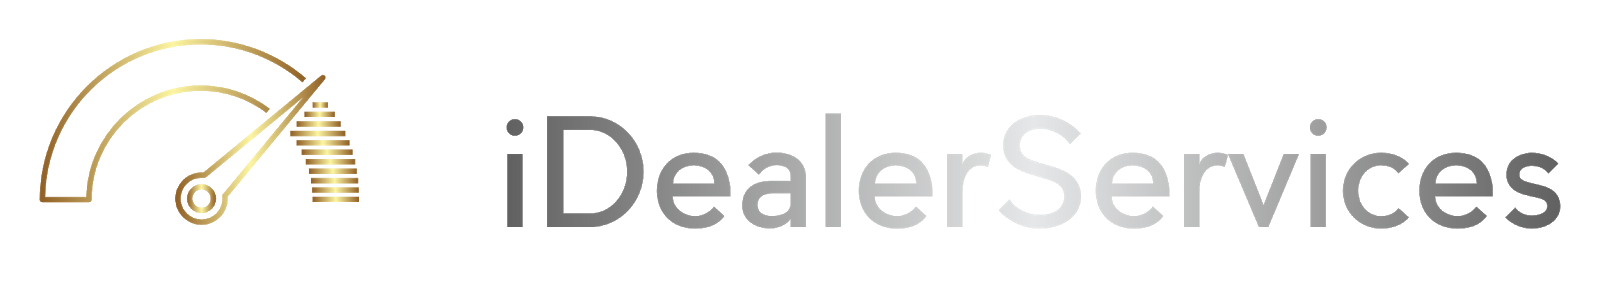 iDealerServices